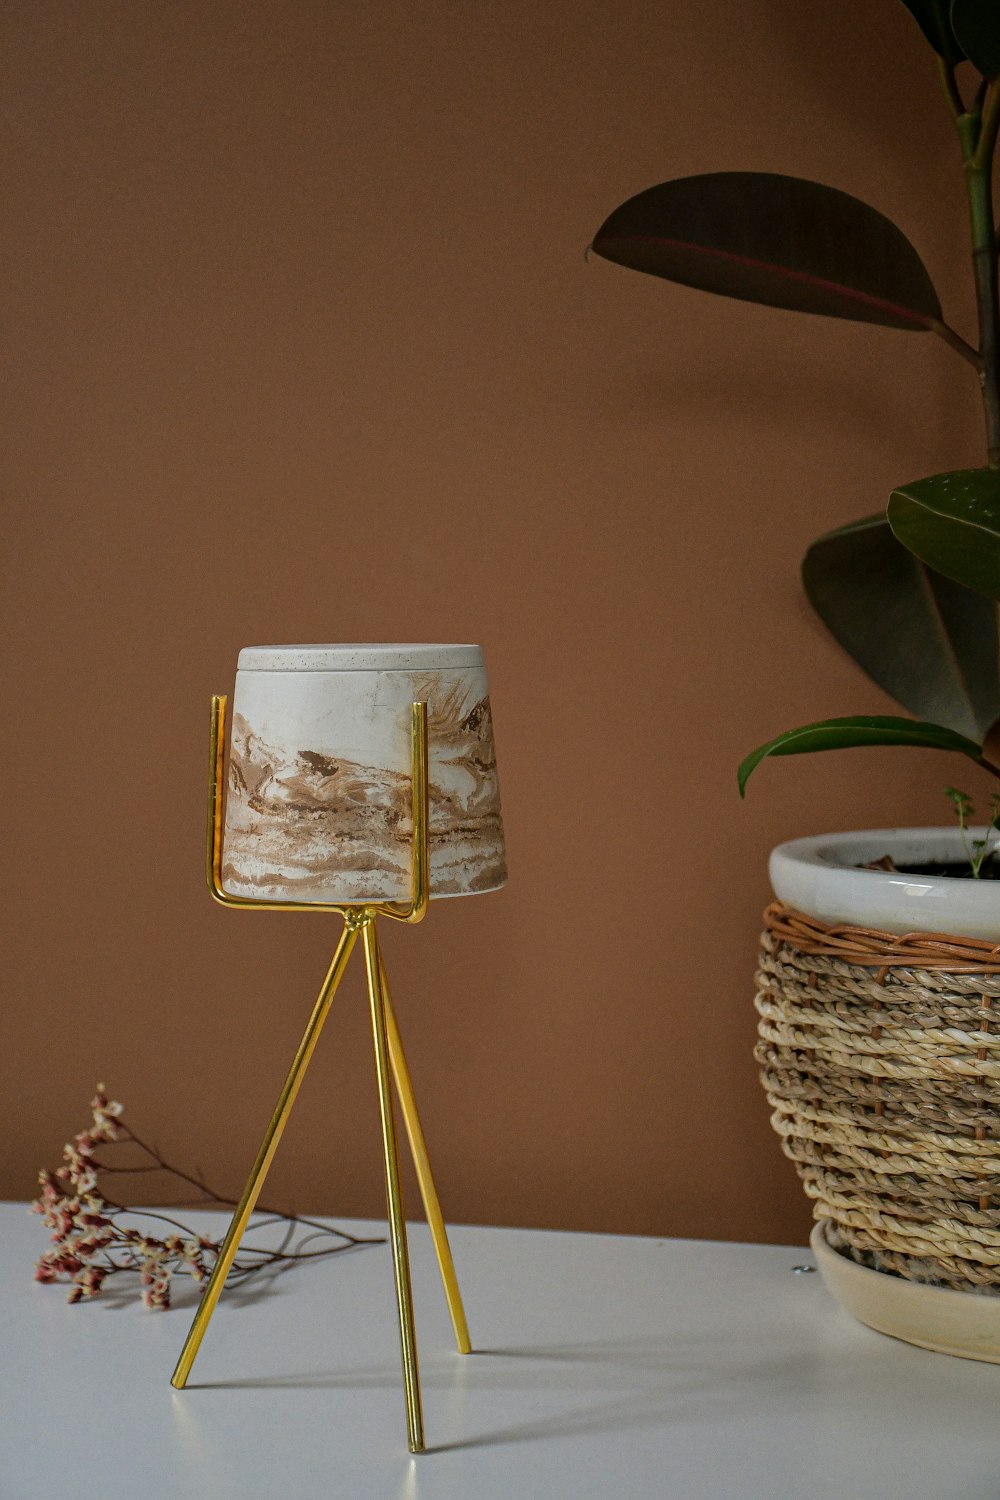 white and brown table lamp on brown wooden table